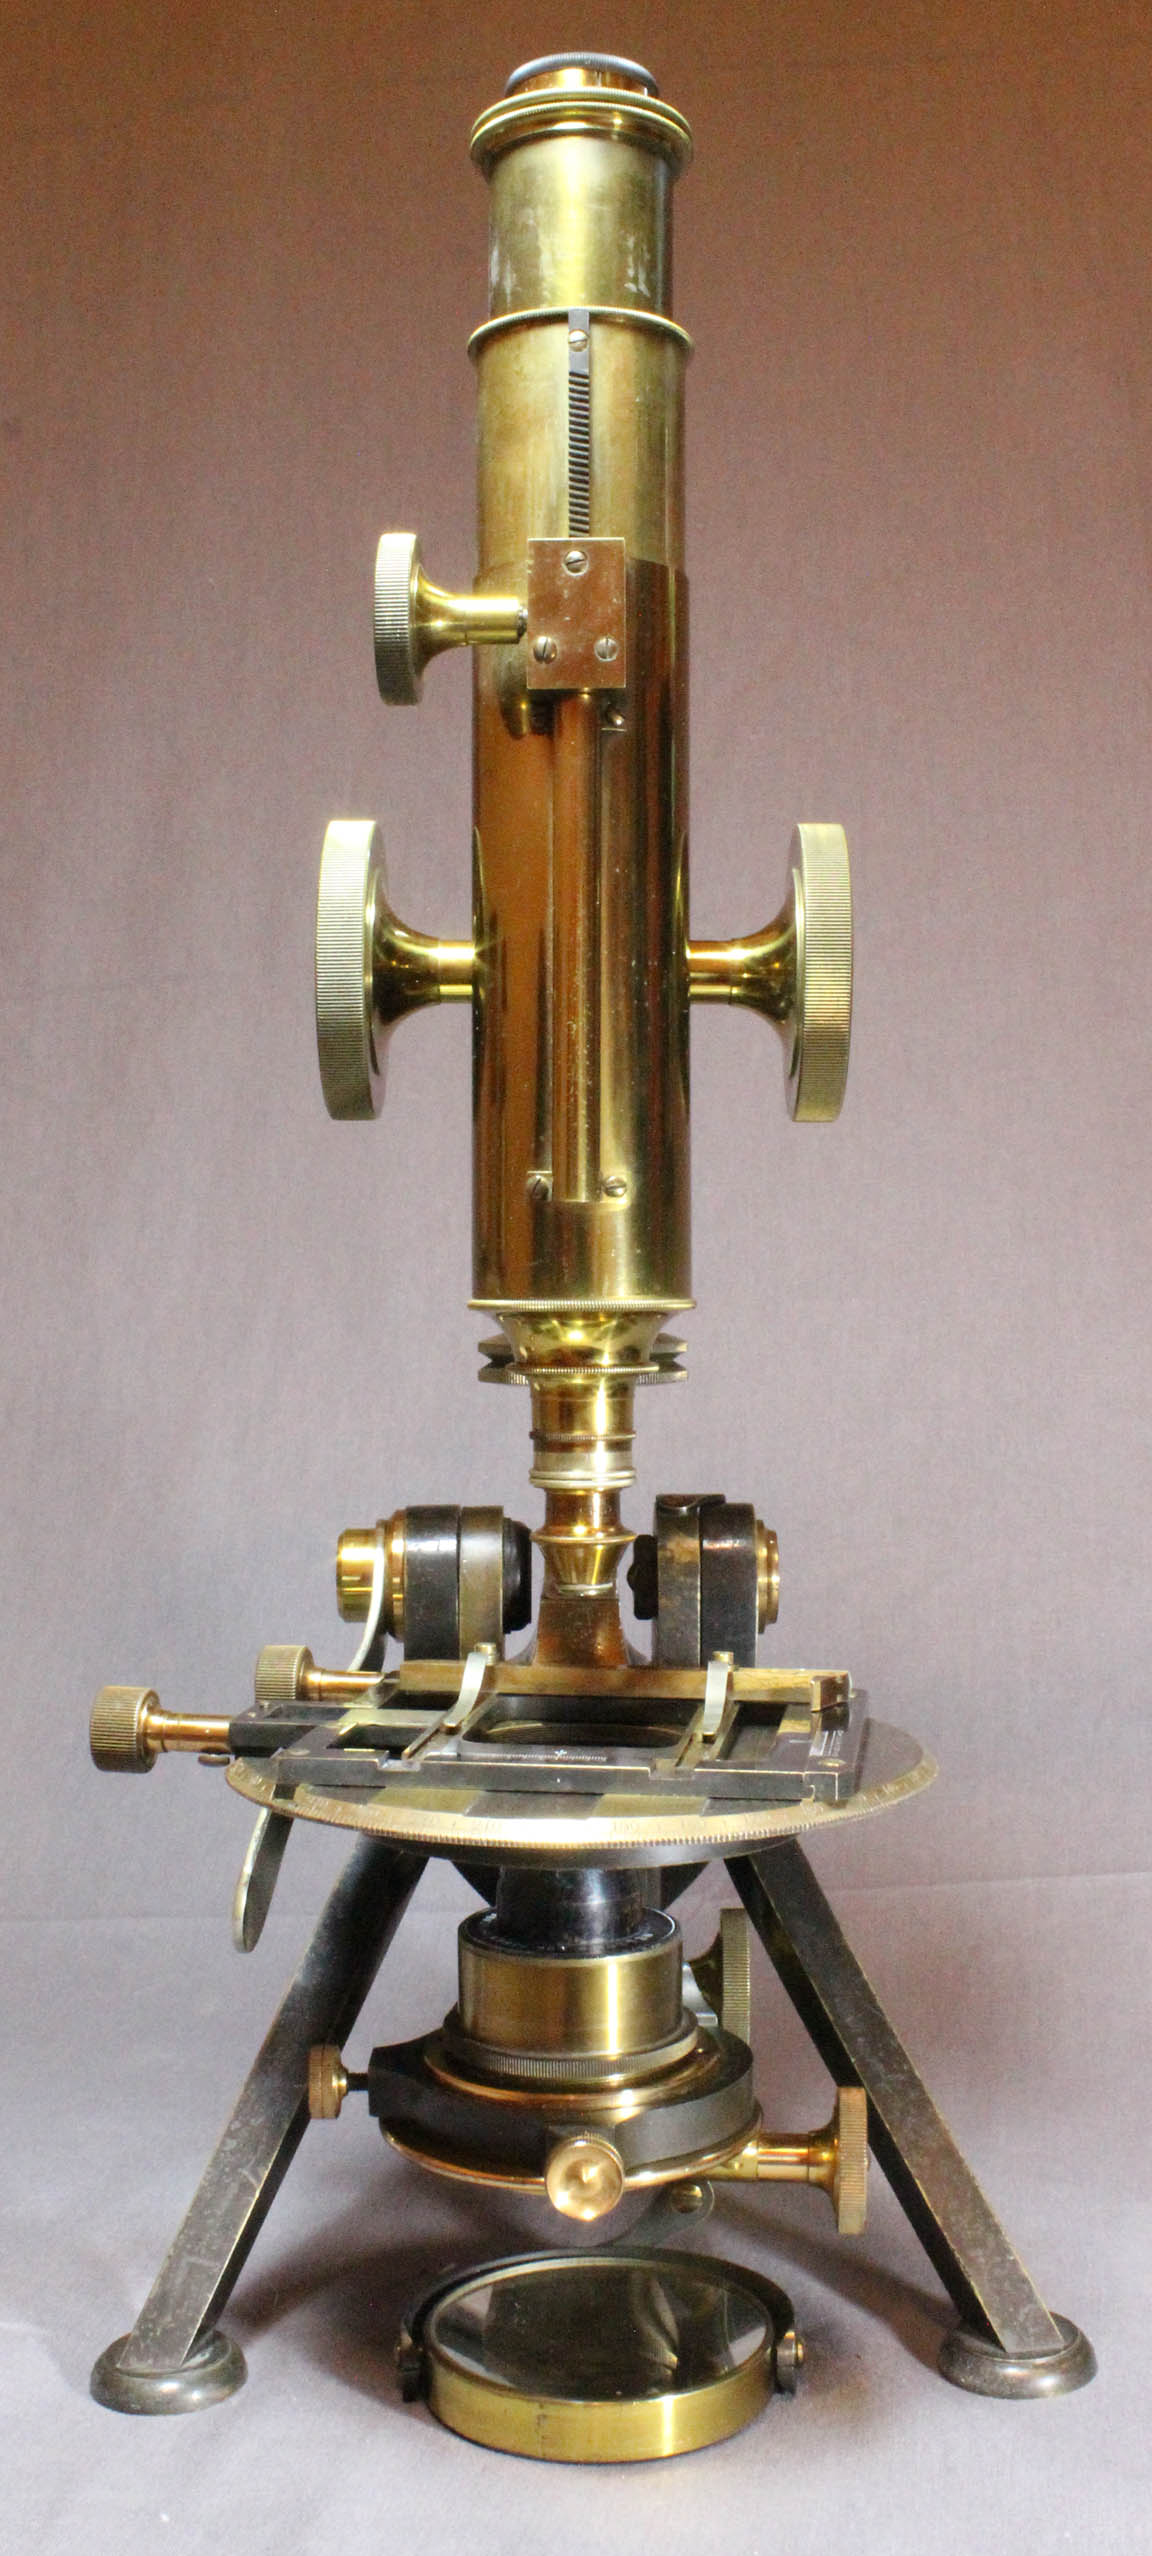 Nelson-Curties Microscope front